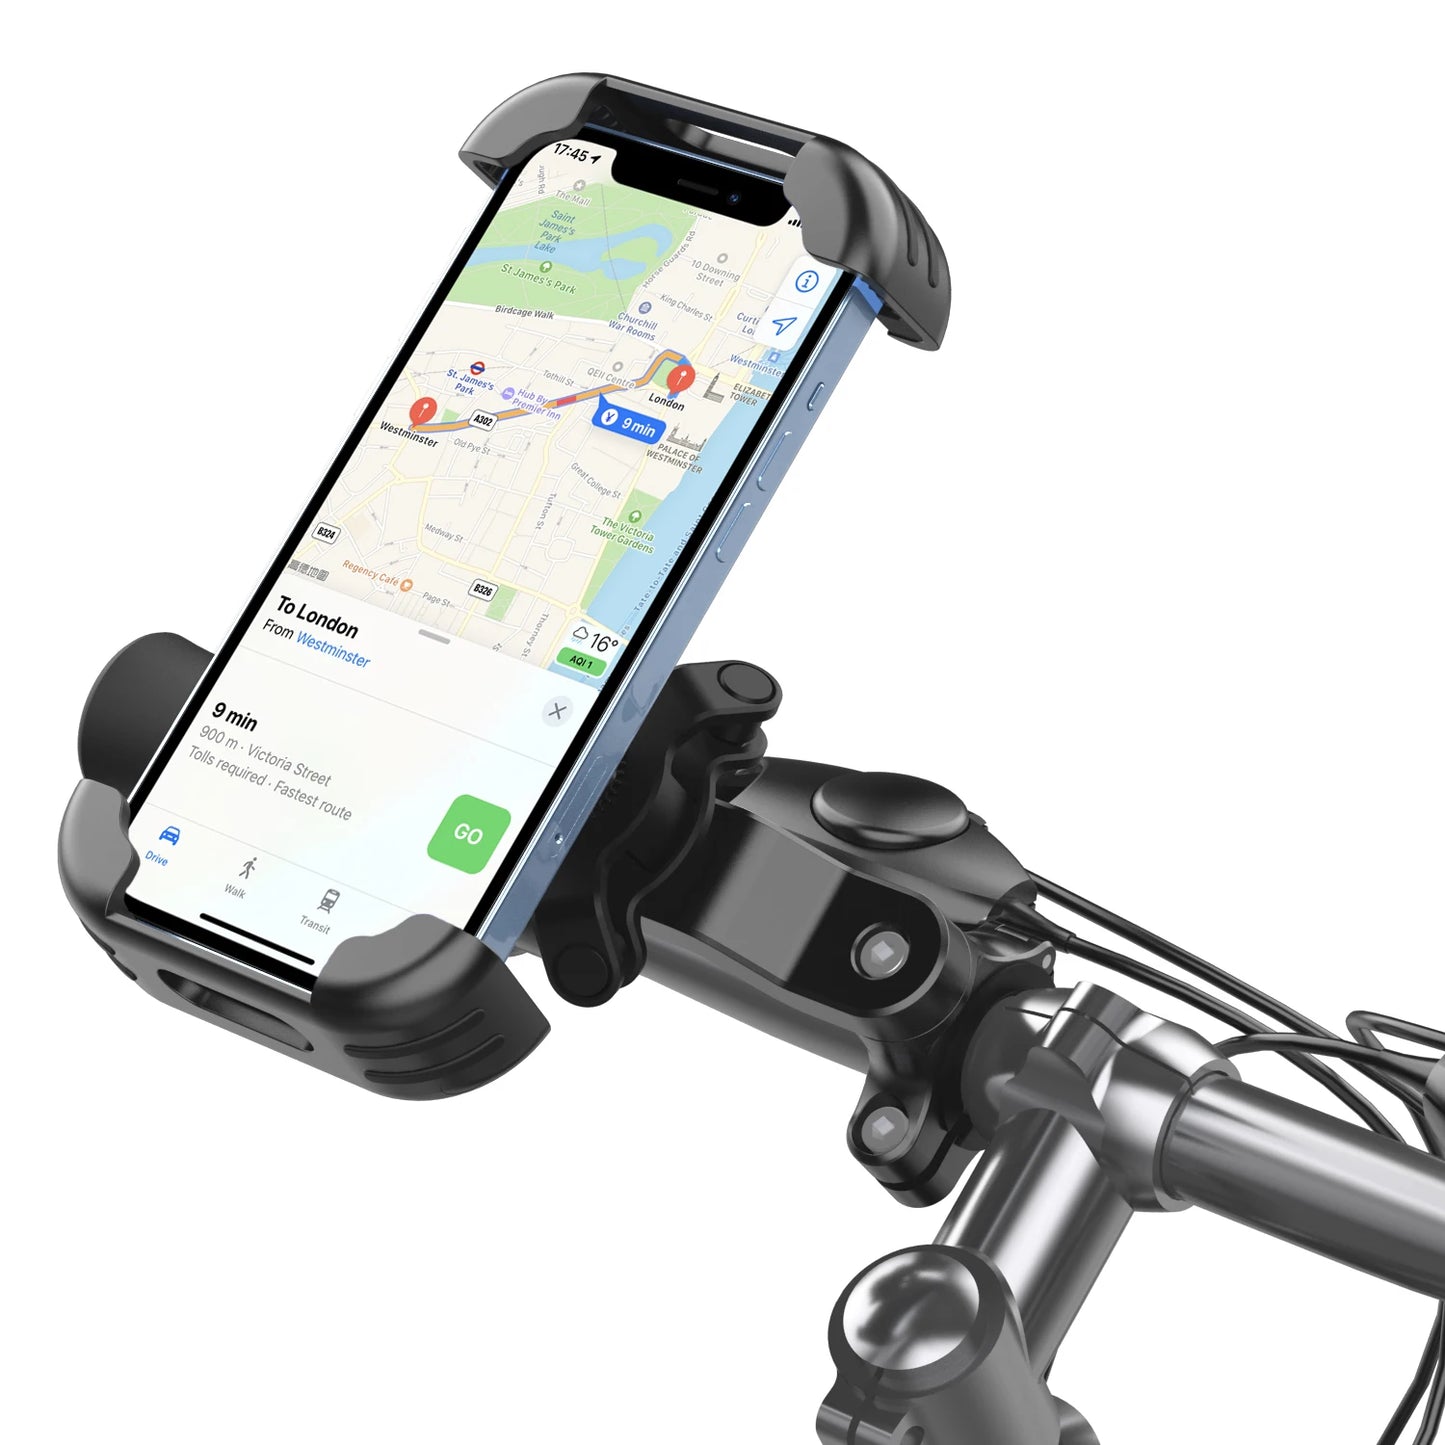 Bicycle Phone Holder Stand for Iphone Xiaomi Samsung Motorcycle Mobile Cellphone Holder Bike Scooter Handlebar Clip Mount